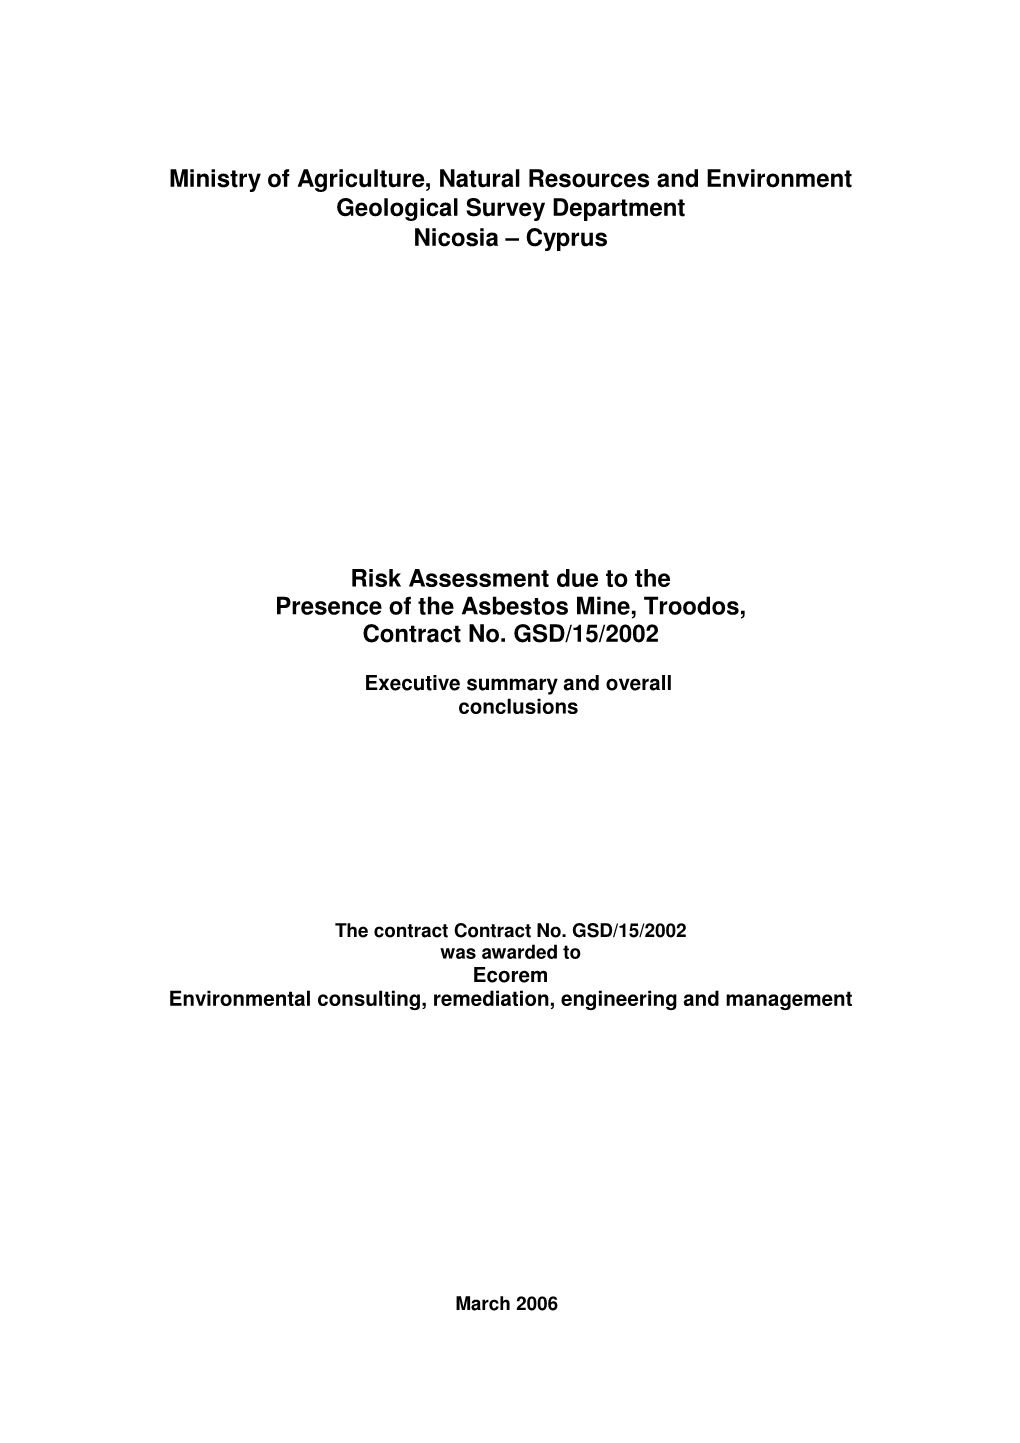 Ministry of Agriculture, Natural Resources and Environment Geological Survey Department Nicosia – Cyprus Risk Assessment Due T